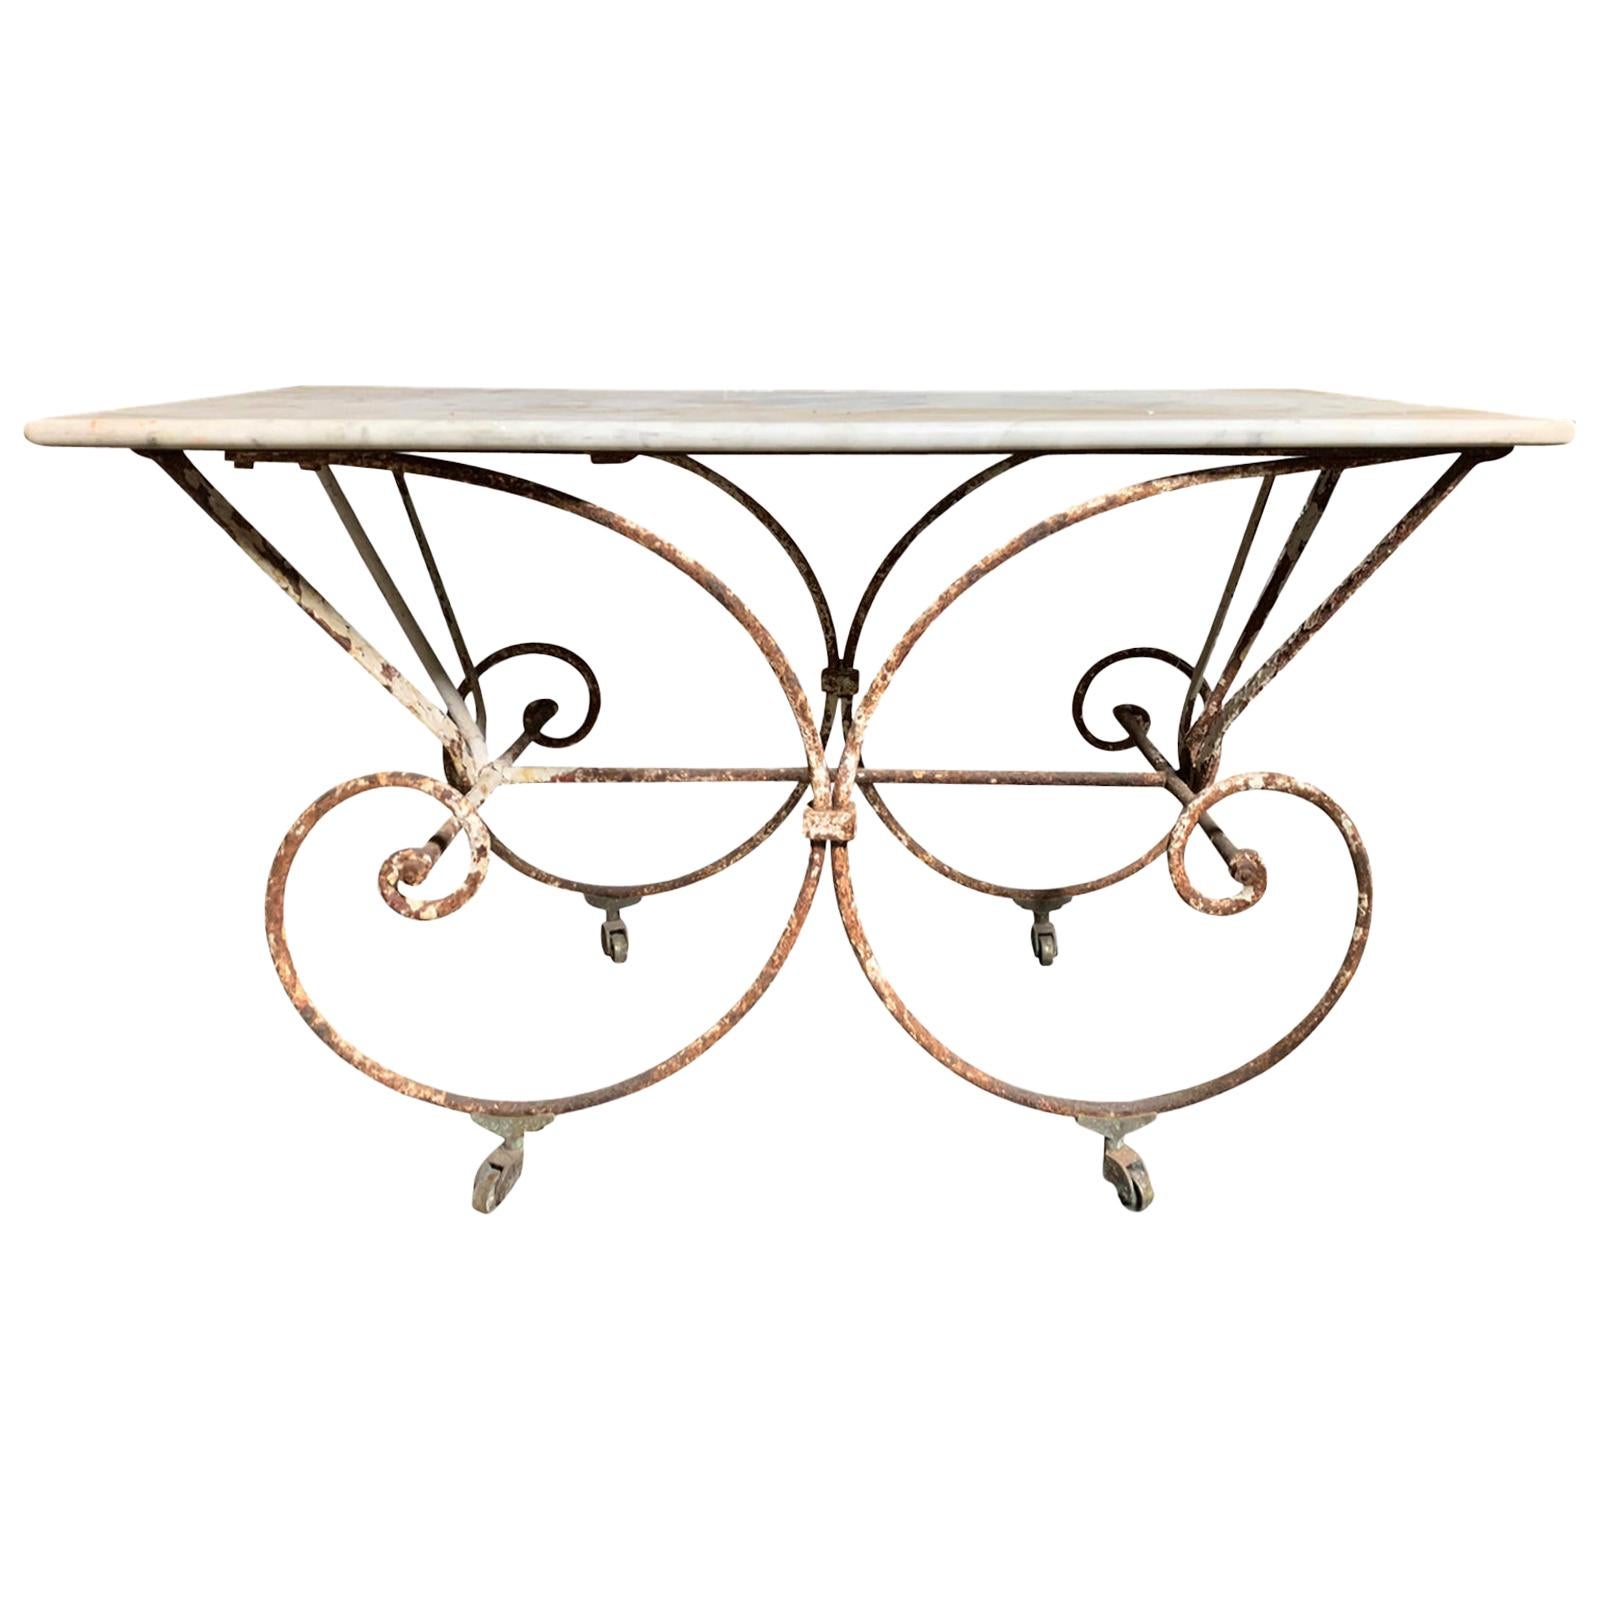 19th-20th Century French Iron and Marble Pastry Table For Sale